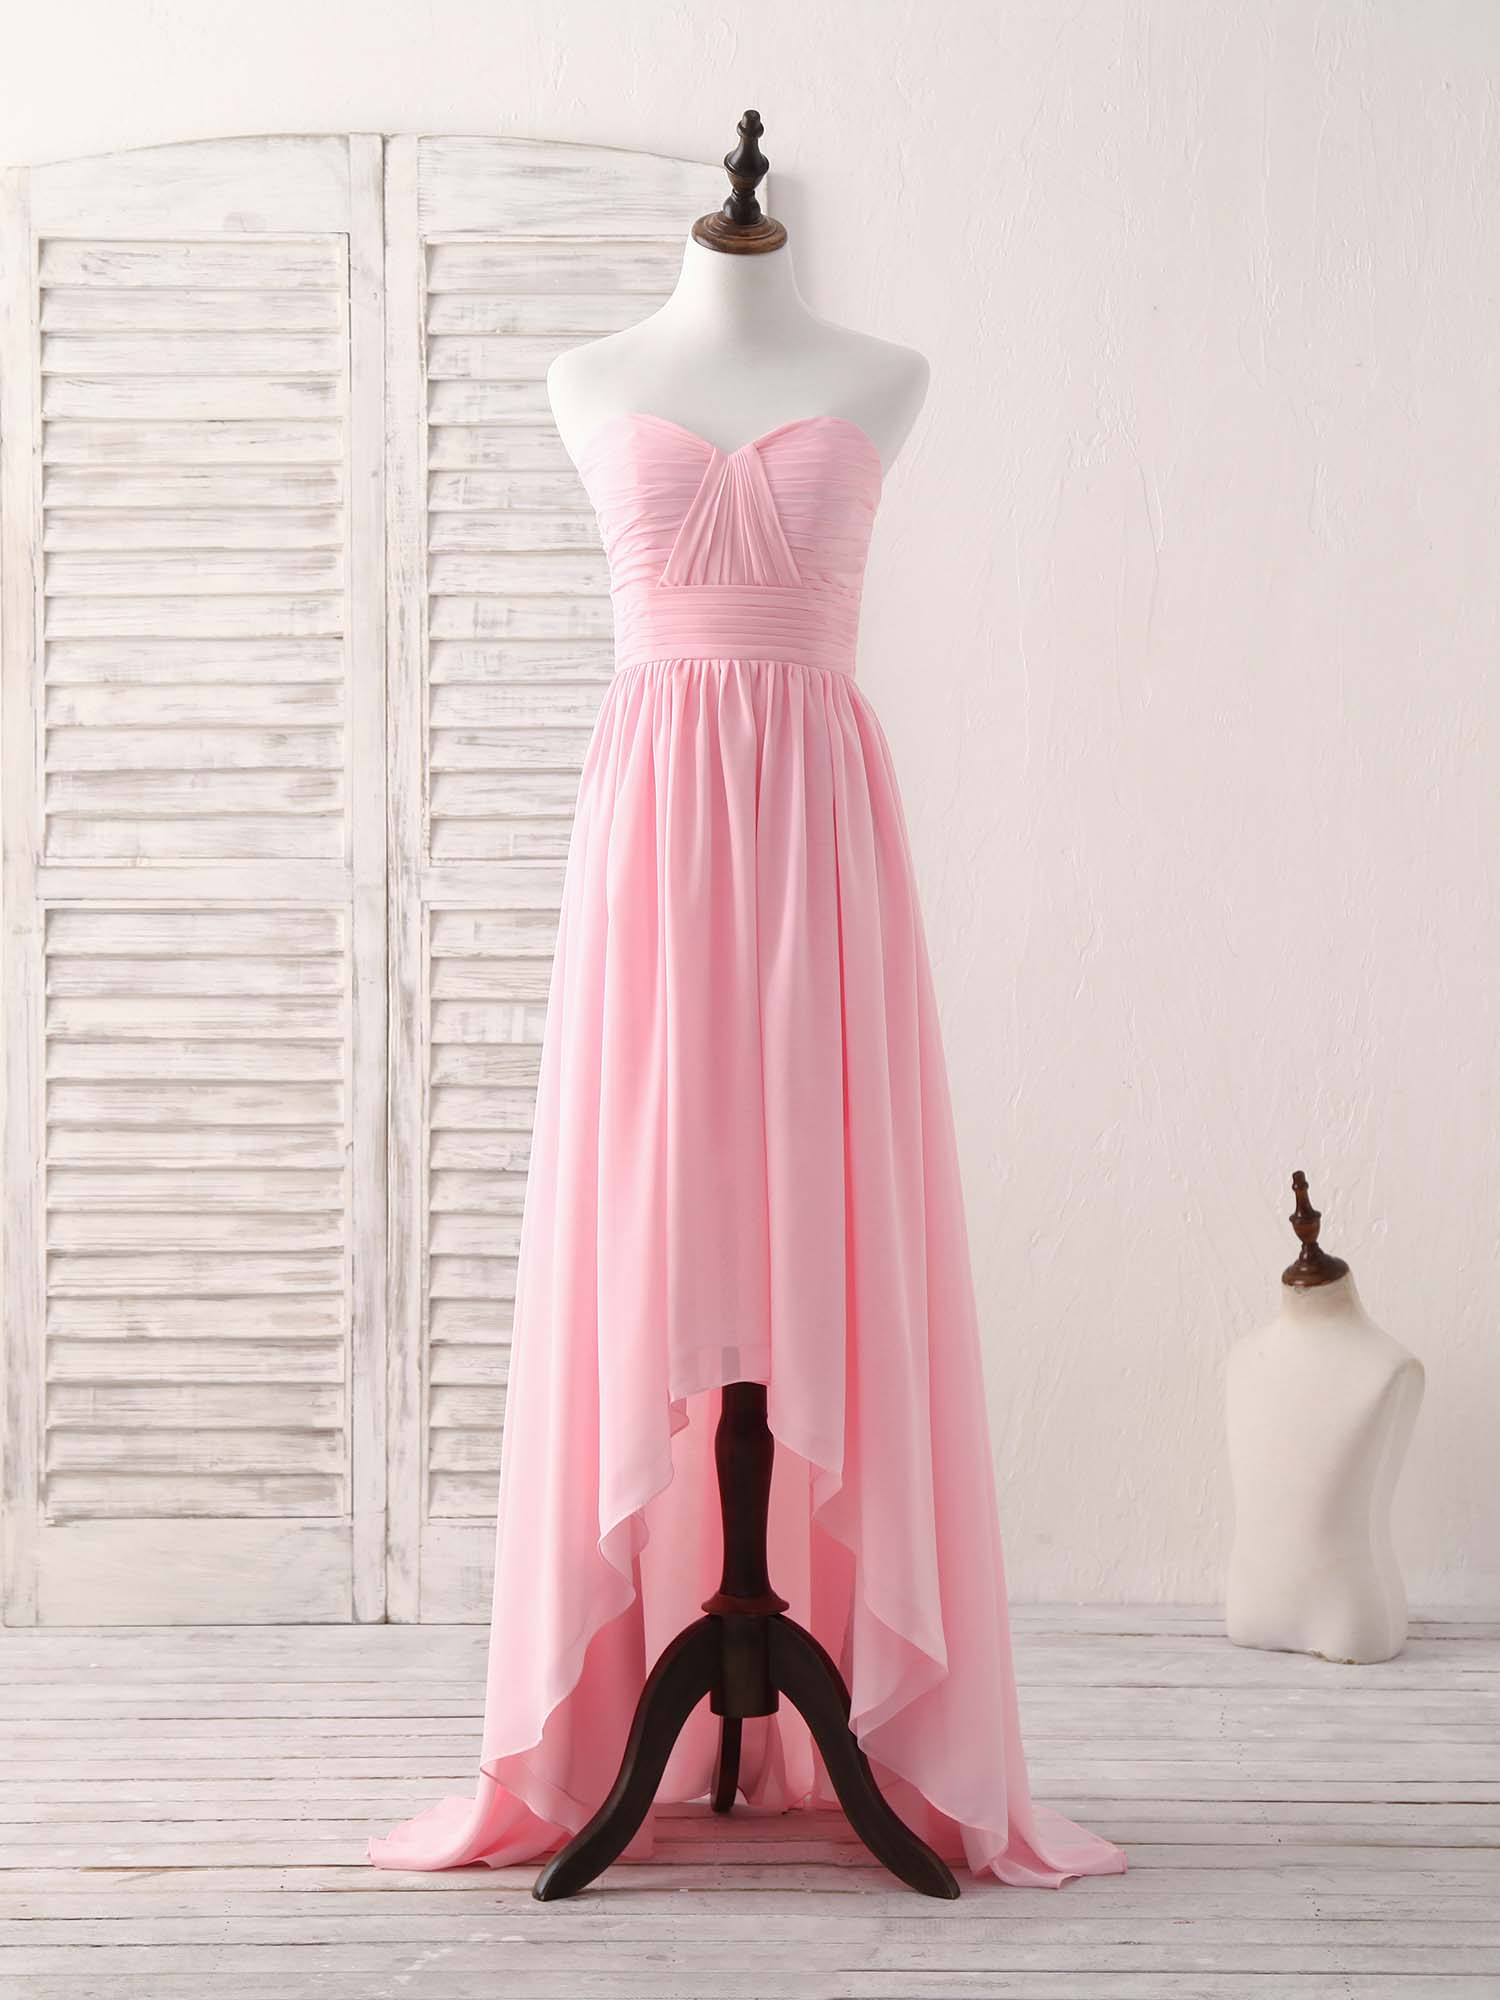 Party Dresses Miami, Pink Sweetheart Neck Chiffon High Low Prom Dress, Bridesmaid Dress